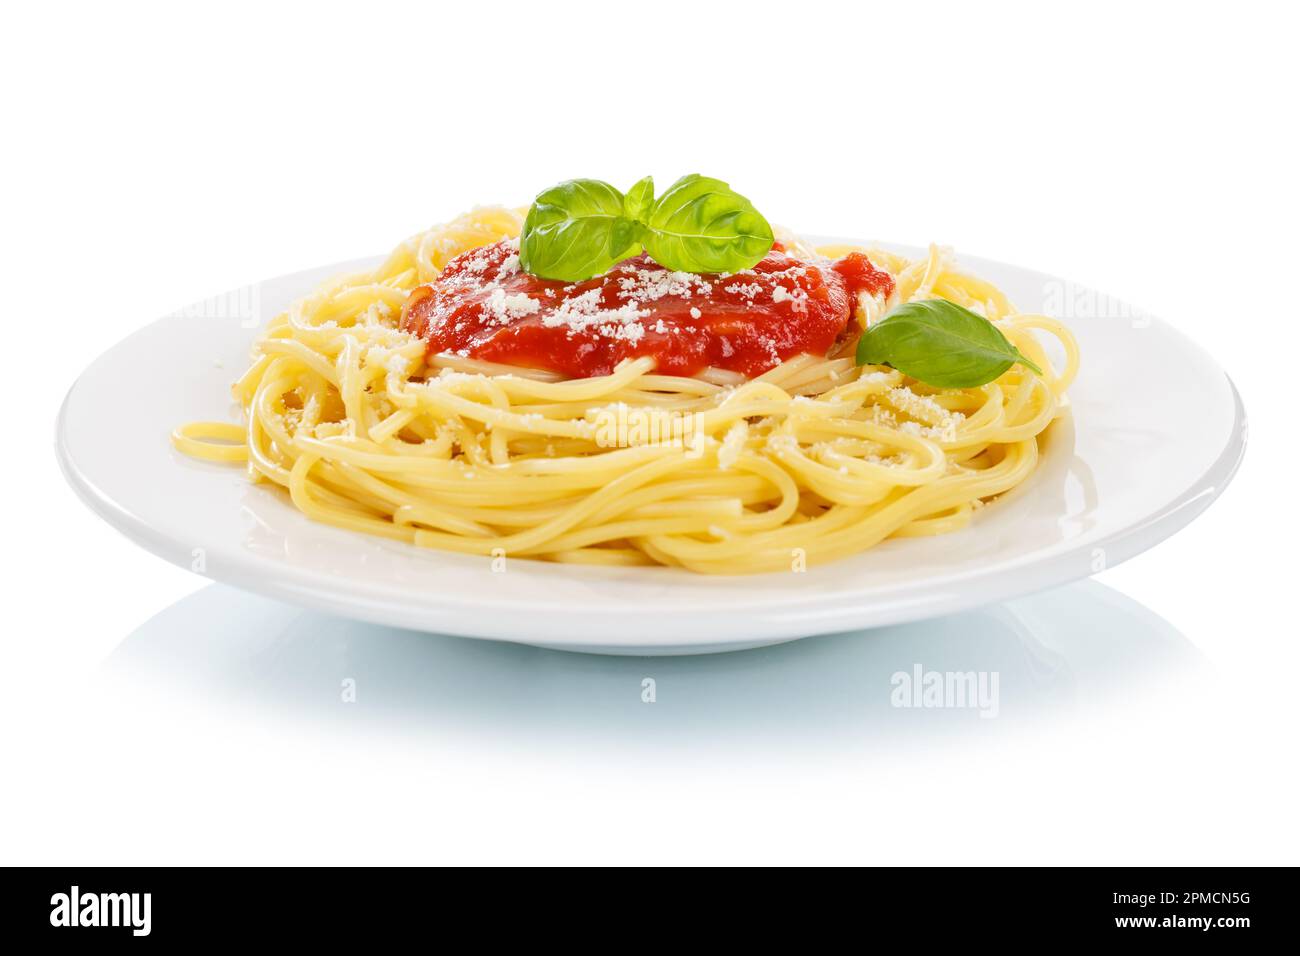 Spaghetti isolated on a white background eat meal from Italy pasta lunch with tomato sauce Stock Photo